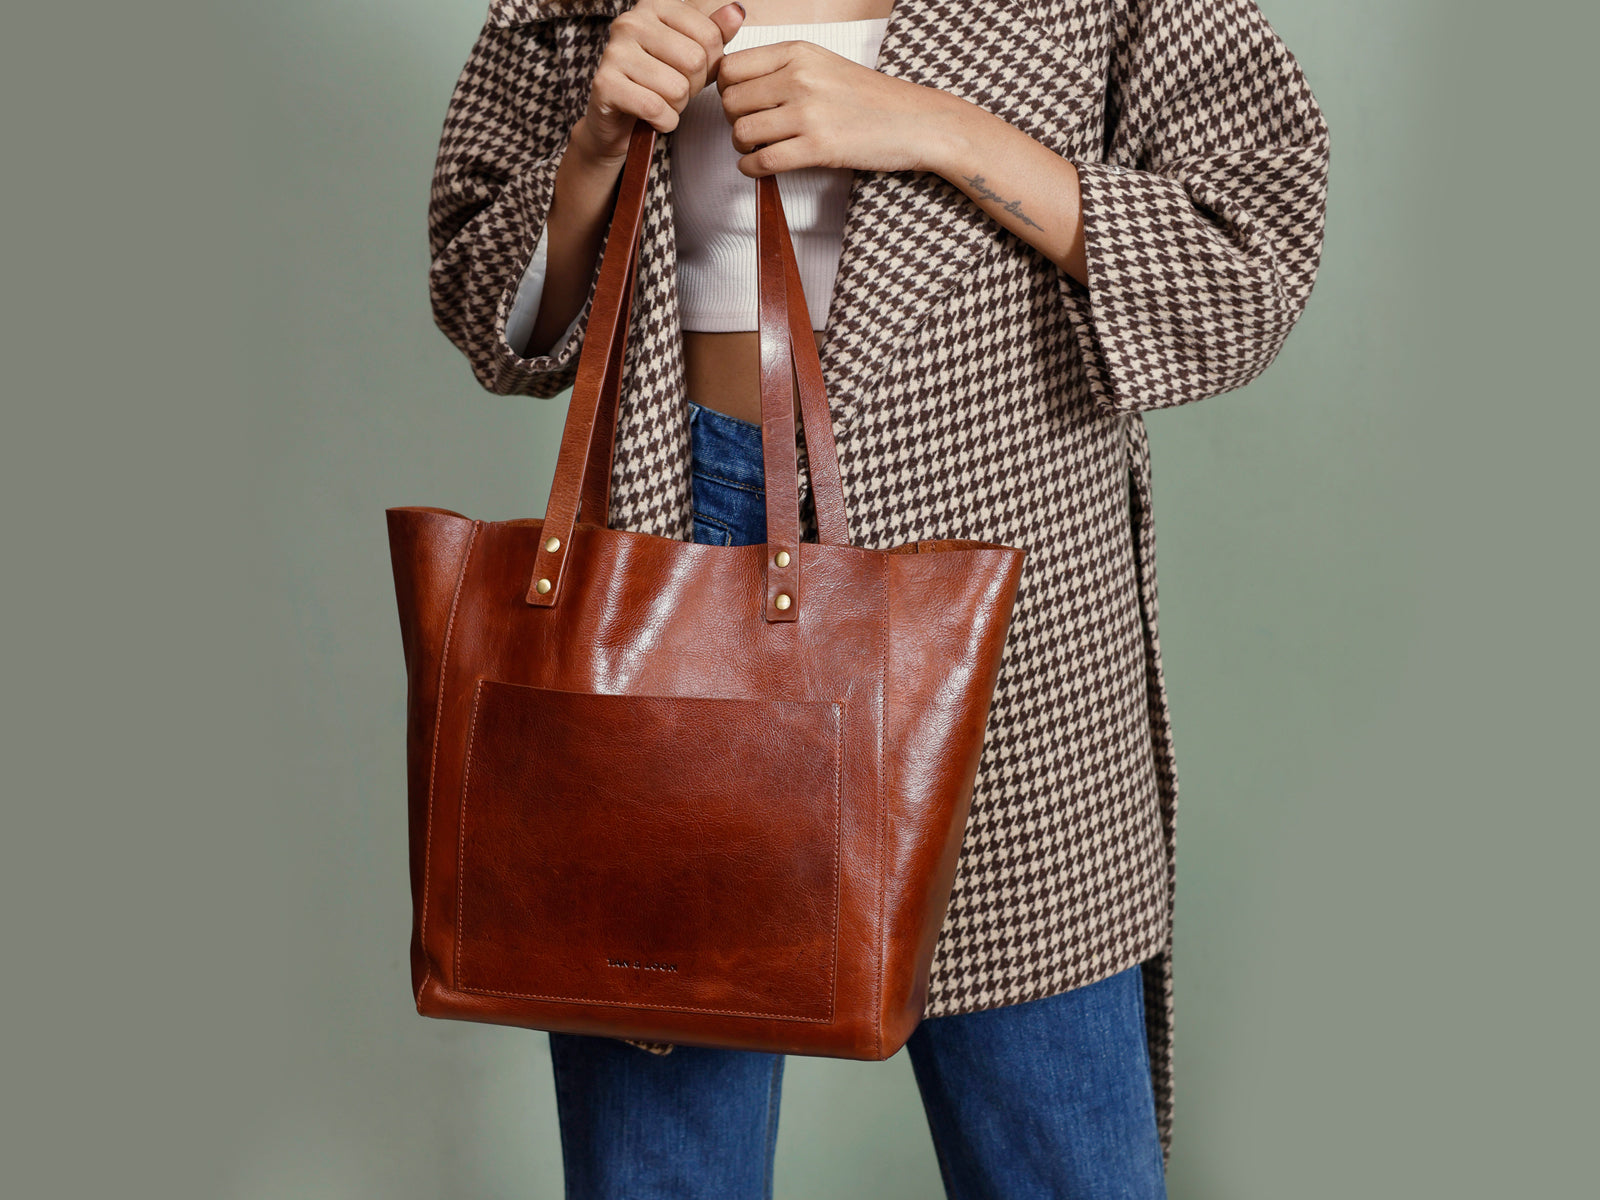 Handcrafted Premium Vegetable Tanned Leather Tote Bag for Women Tan & Loom